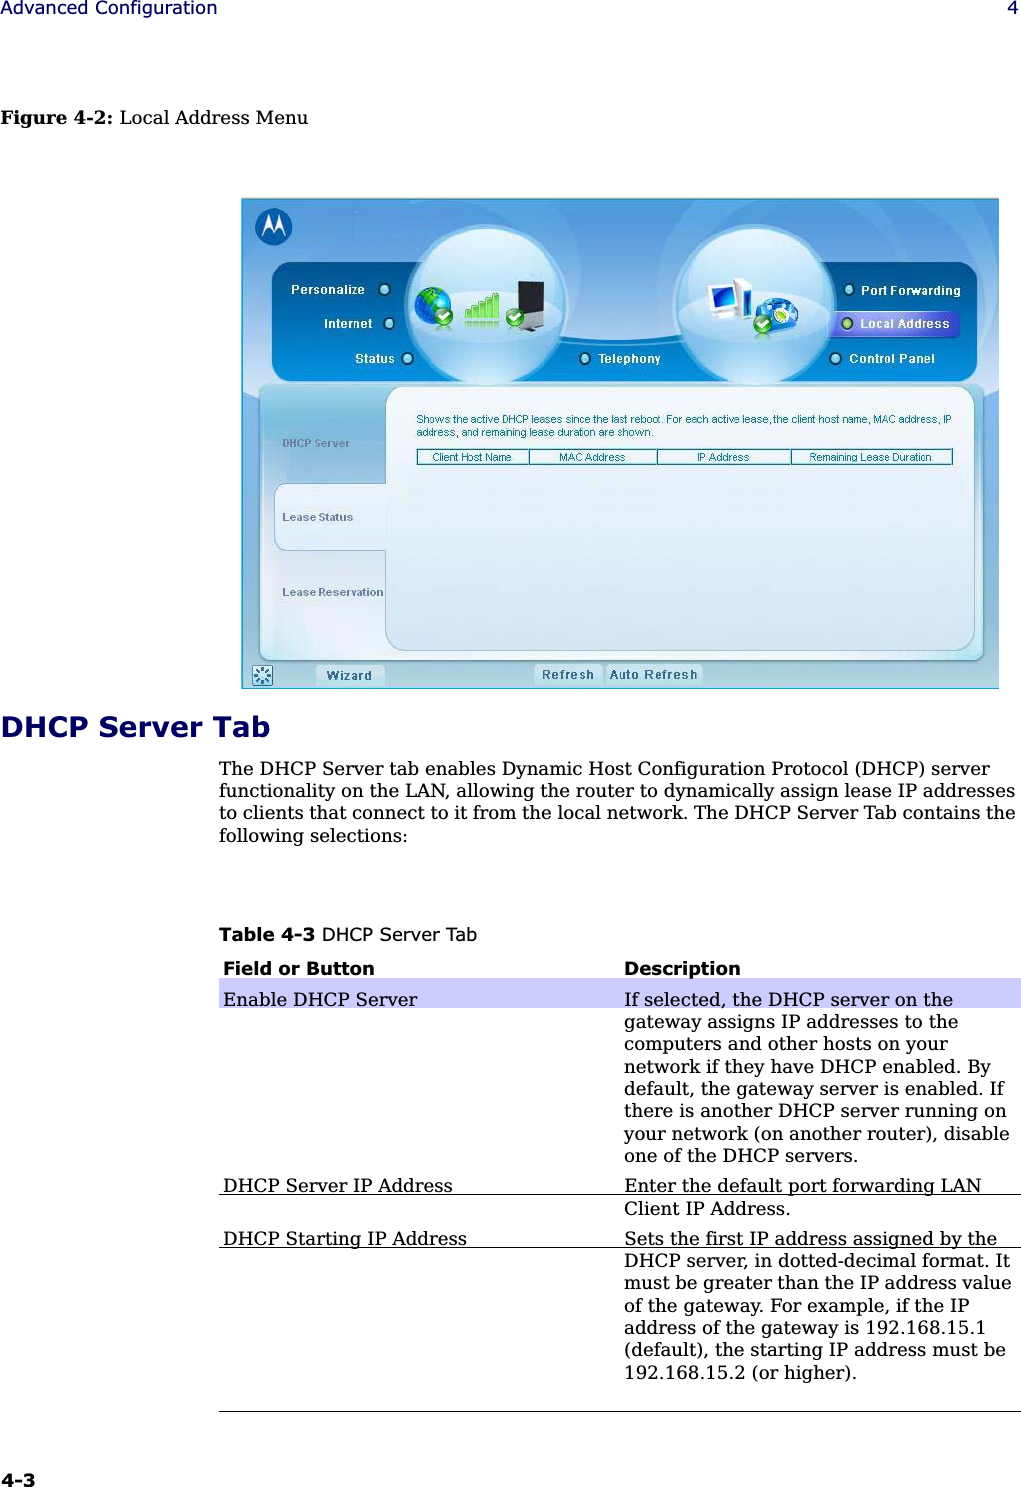 4-3Advanced Configuration 4Figure 4-2: Local Address MenuDHCP Server TabThe DHCP Server tab enables Dynamic Host Configuration Protocol (DHCP) server functionality on the LAN, allowing the router to dynamically assign lease IP addresses to clients that connect to it from the local network. The DHCP Server Tab contains the following selections:Table 4-3 DHCP Server TabField or Button DescriptionEnable DHCP Server If selected, the DHCP server on the gateway assigns IP addresses to the computers and other hosts on your network if they have DHCP enabled. By default, the gateway server is enabled. If there is another DHCP server running on your network (on another router), disable one of the DHCP servers.DHCP Server IP Address Enter the default port forwarding LAN Client IP Address. DHCP Starting IP Address Sets the first IP address assigned by the DHCP server, in dotted-decimal format. It must be greater than the IP address value of the gateway. For example, if the IP address of the gateway is 192.168.15.1 (default), the starting IP address must be 192.168.15.2 (or higher).